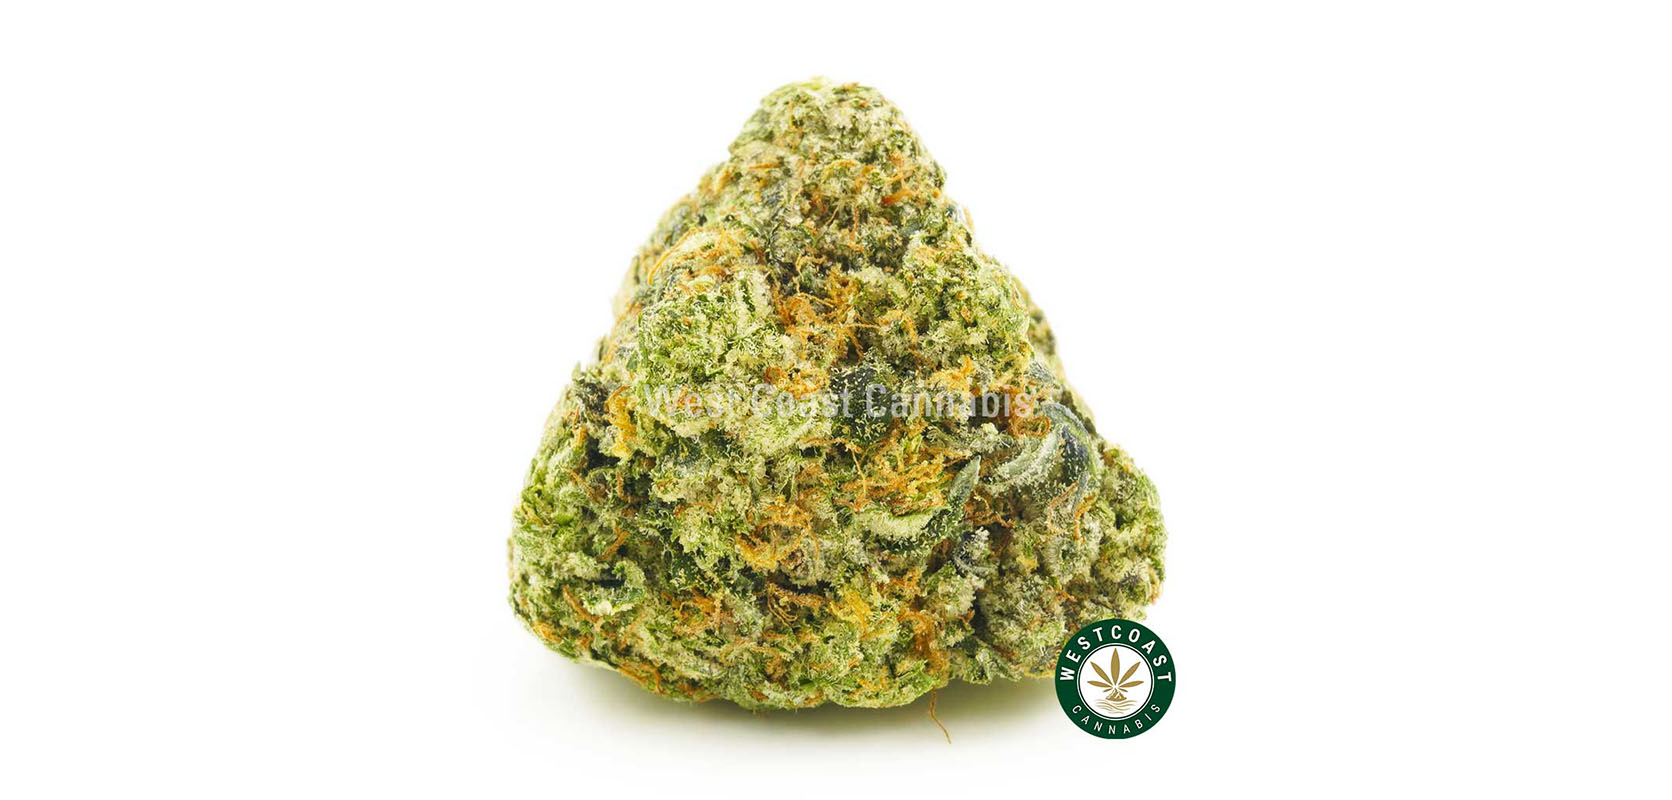 Image of pink tom ford strain weed nug. Buy weed online from west coast cannabis online dispensary.